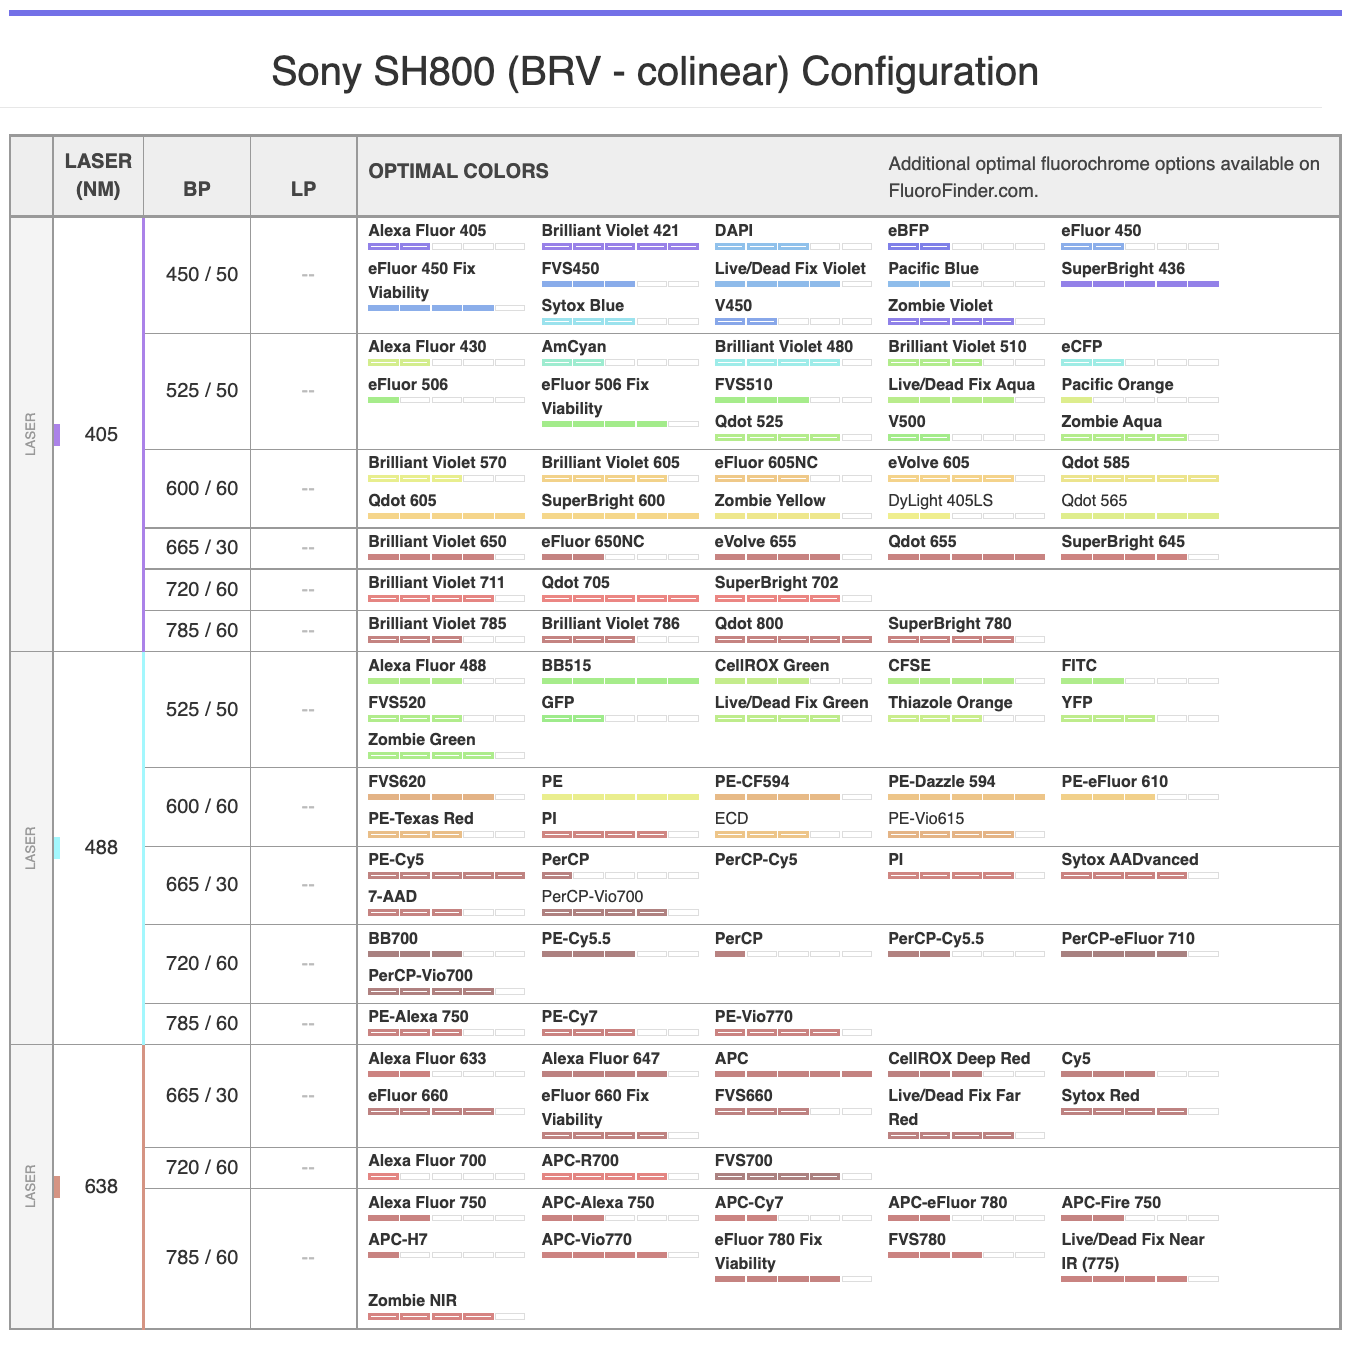 Advanced configuration for Sony SH800